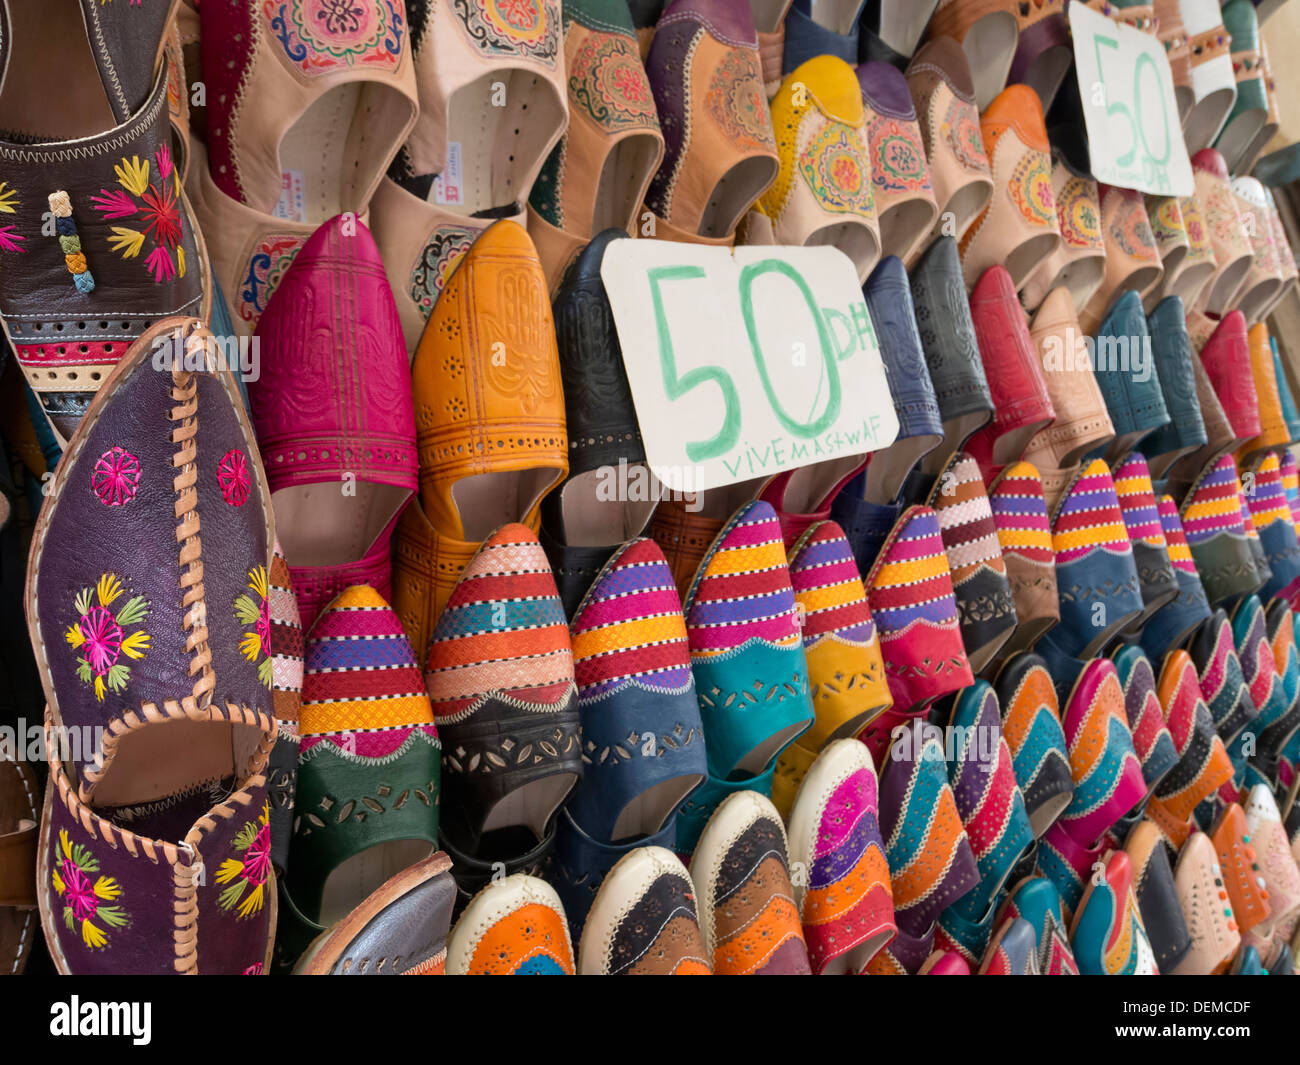 Colorful Babouche leather slippers for sale in Morocco Stock Photo